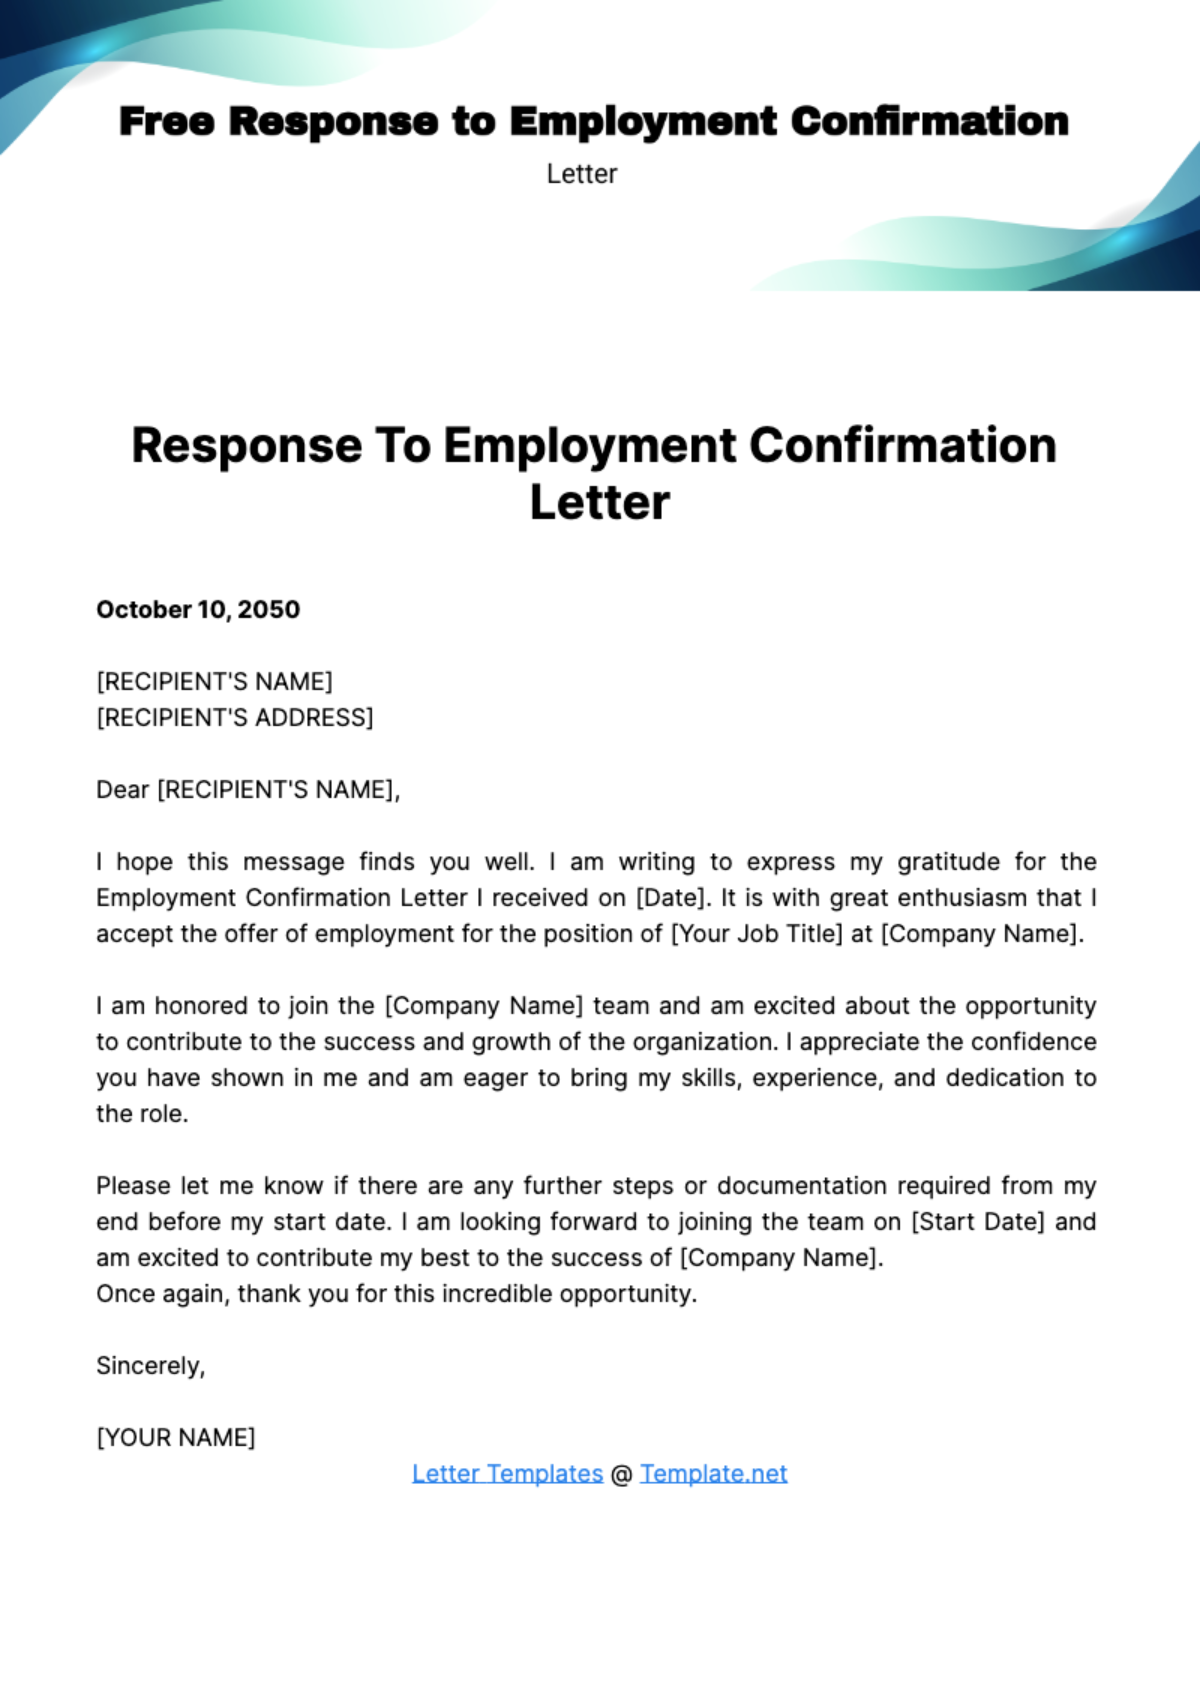 Response to Employment Confirmation Letter Template